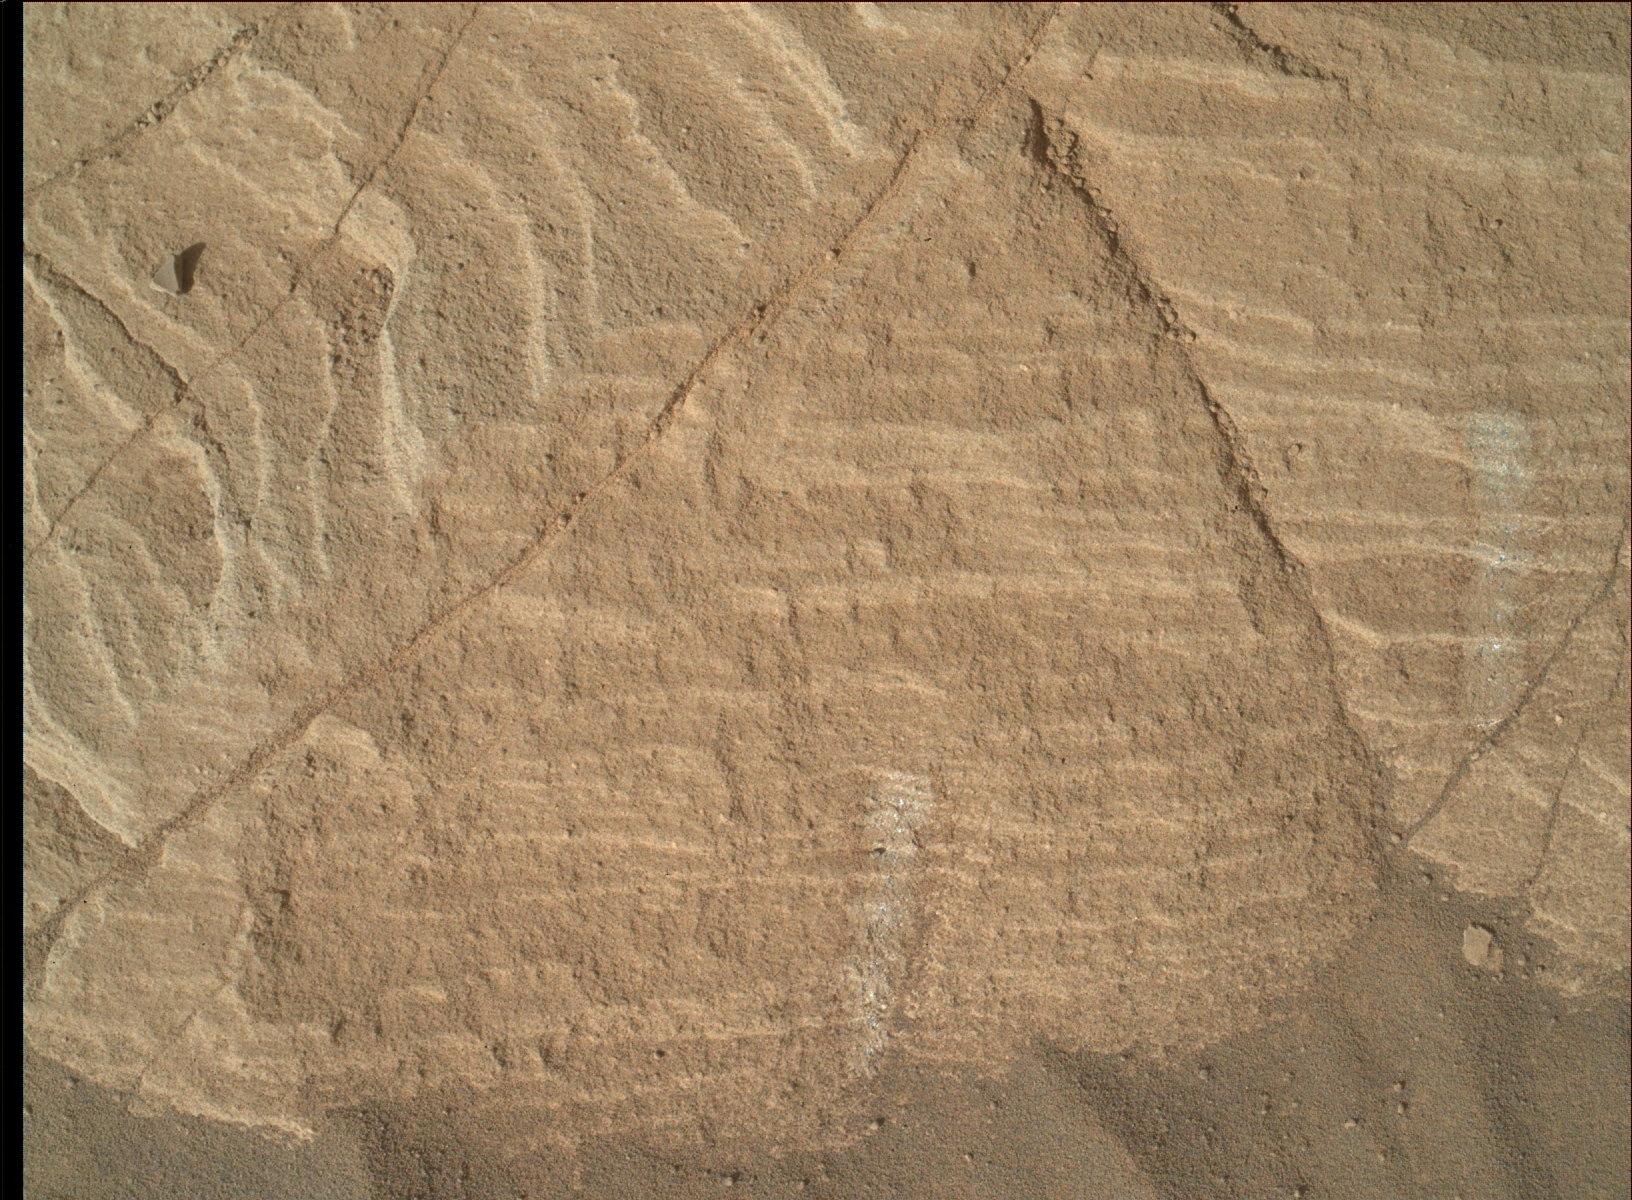 Nasa's Mars rover Curiosity acquired this image using its Mars Hand Lens Imager (MAHLI) on Sol 1128